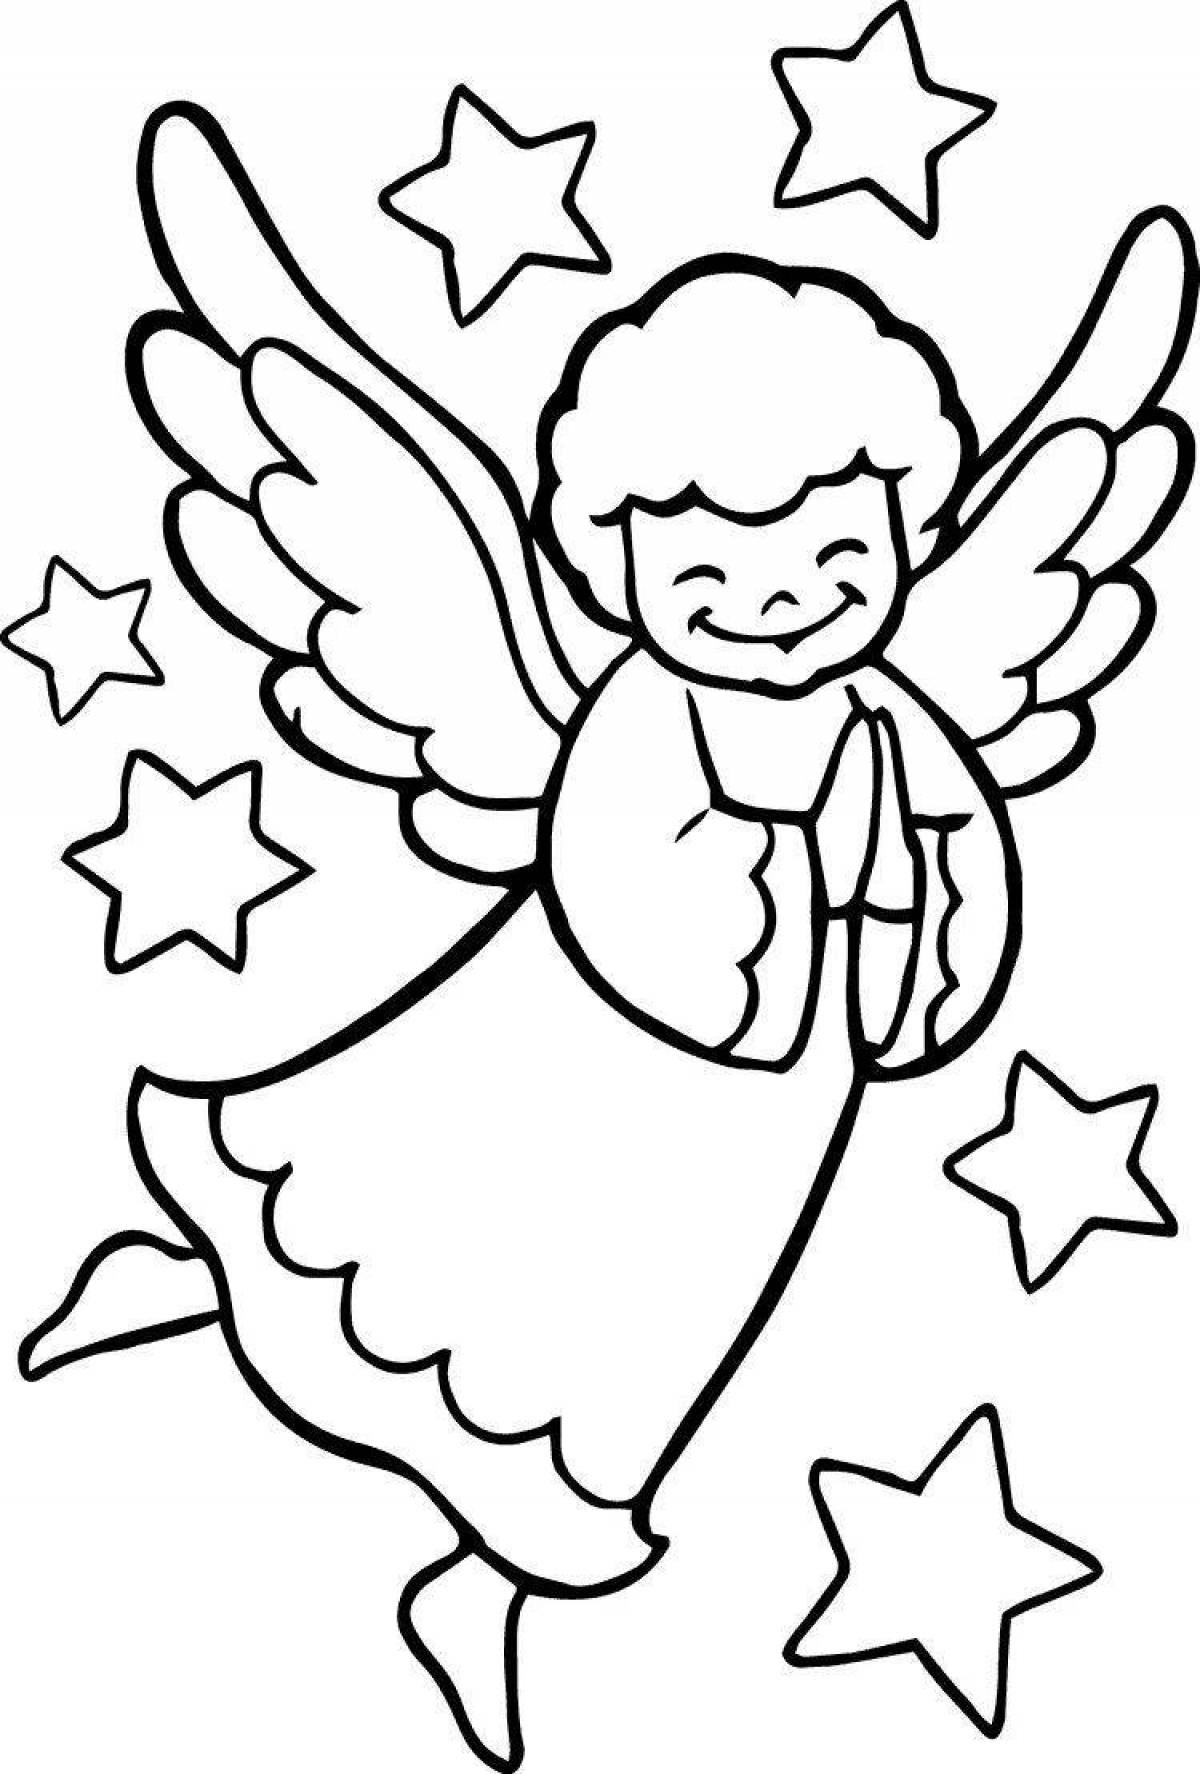 Sparkly Christmas angels coloring book